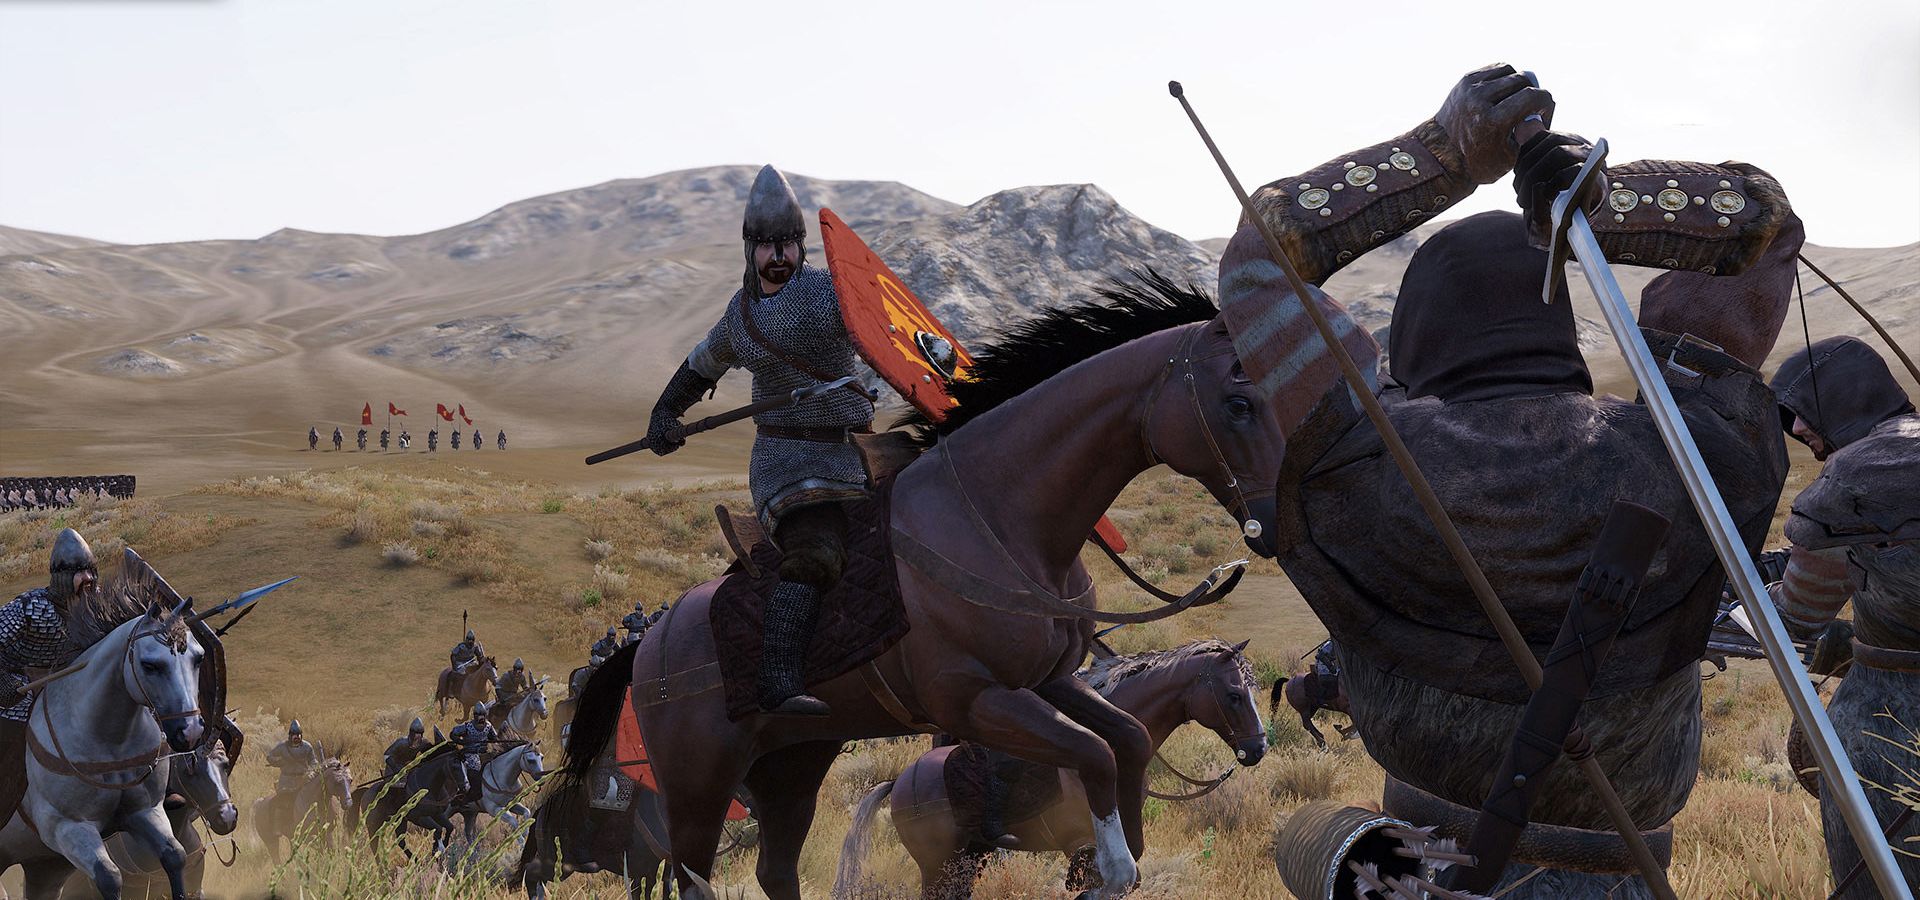 In this article, we are going to be covering Bannerlord Not working: How to fix Mount And Blade 2 Bannerlord Not Launching error so that you can play it with no issues.